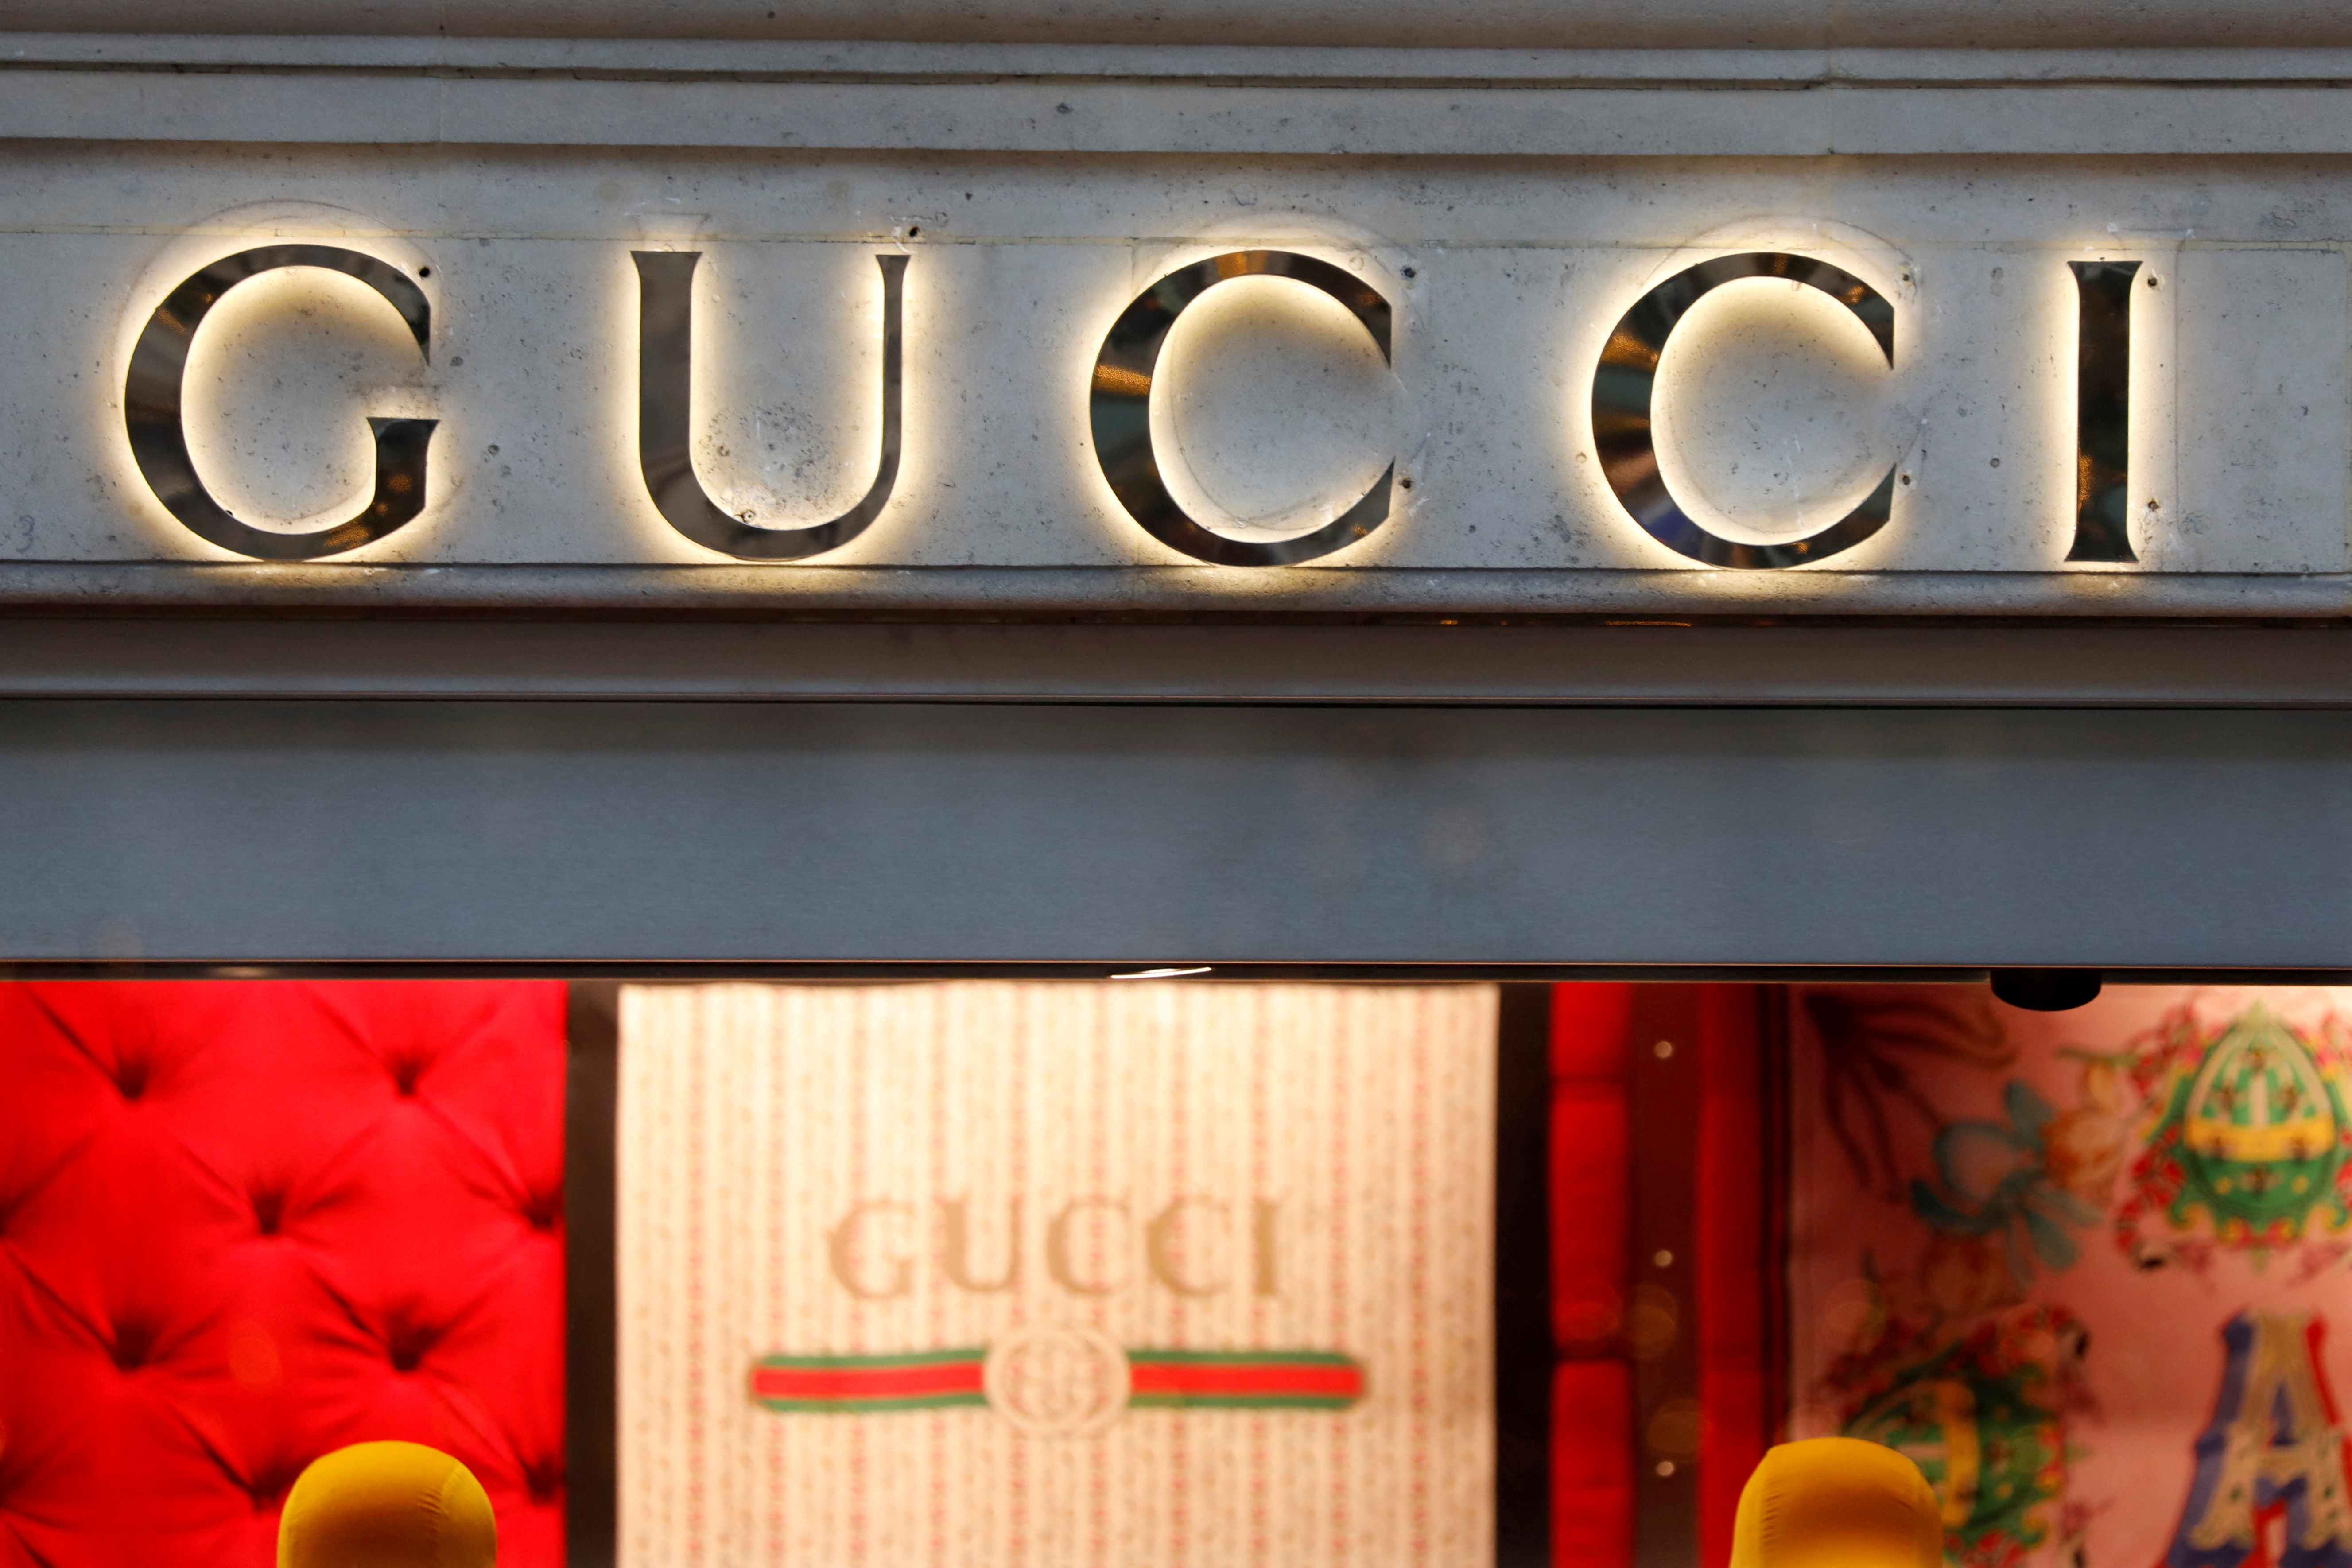 Europe's high-spending tourists set to lift French luxury sales in Q2